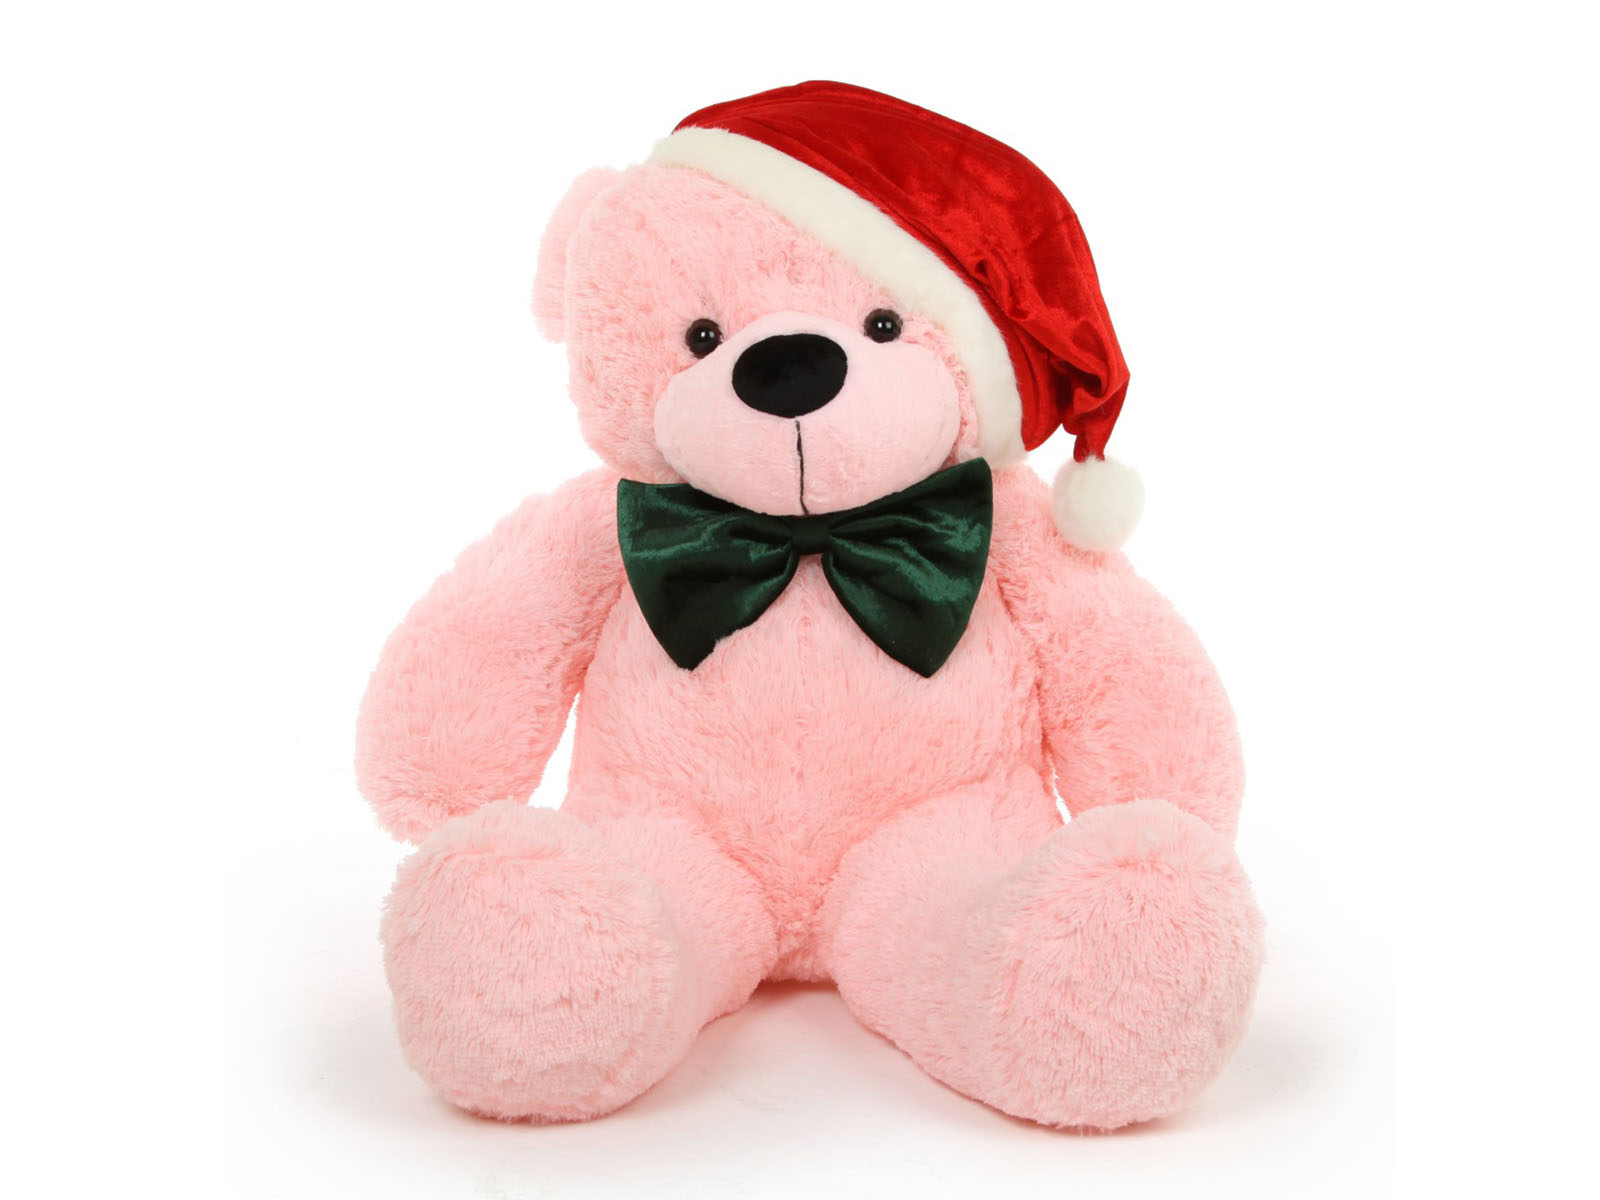 Christmas Teddy Bear Wallpaper Image Photos And Pictures For